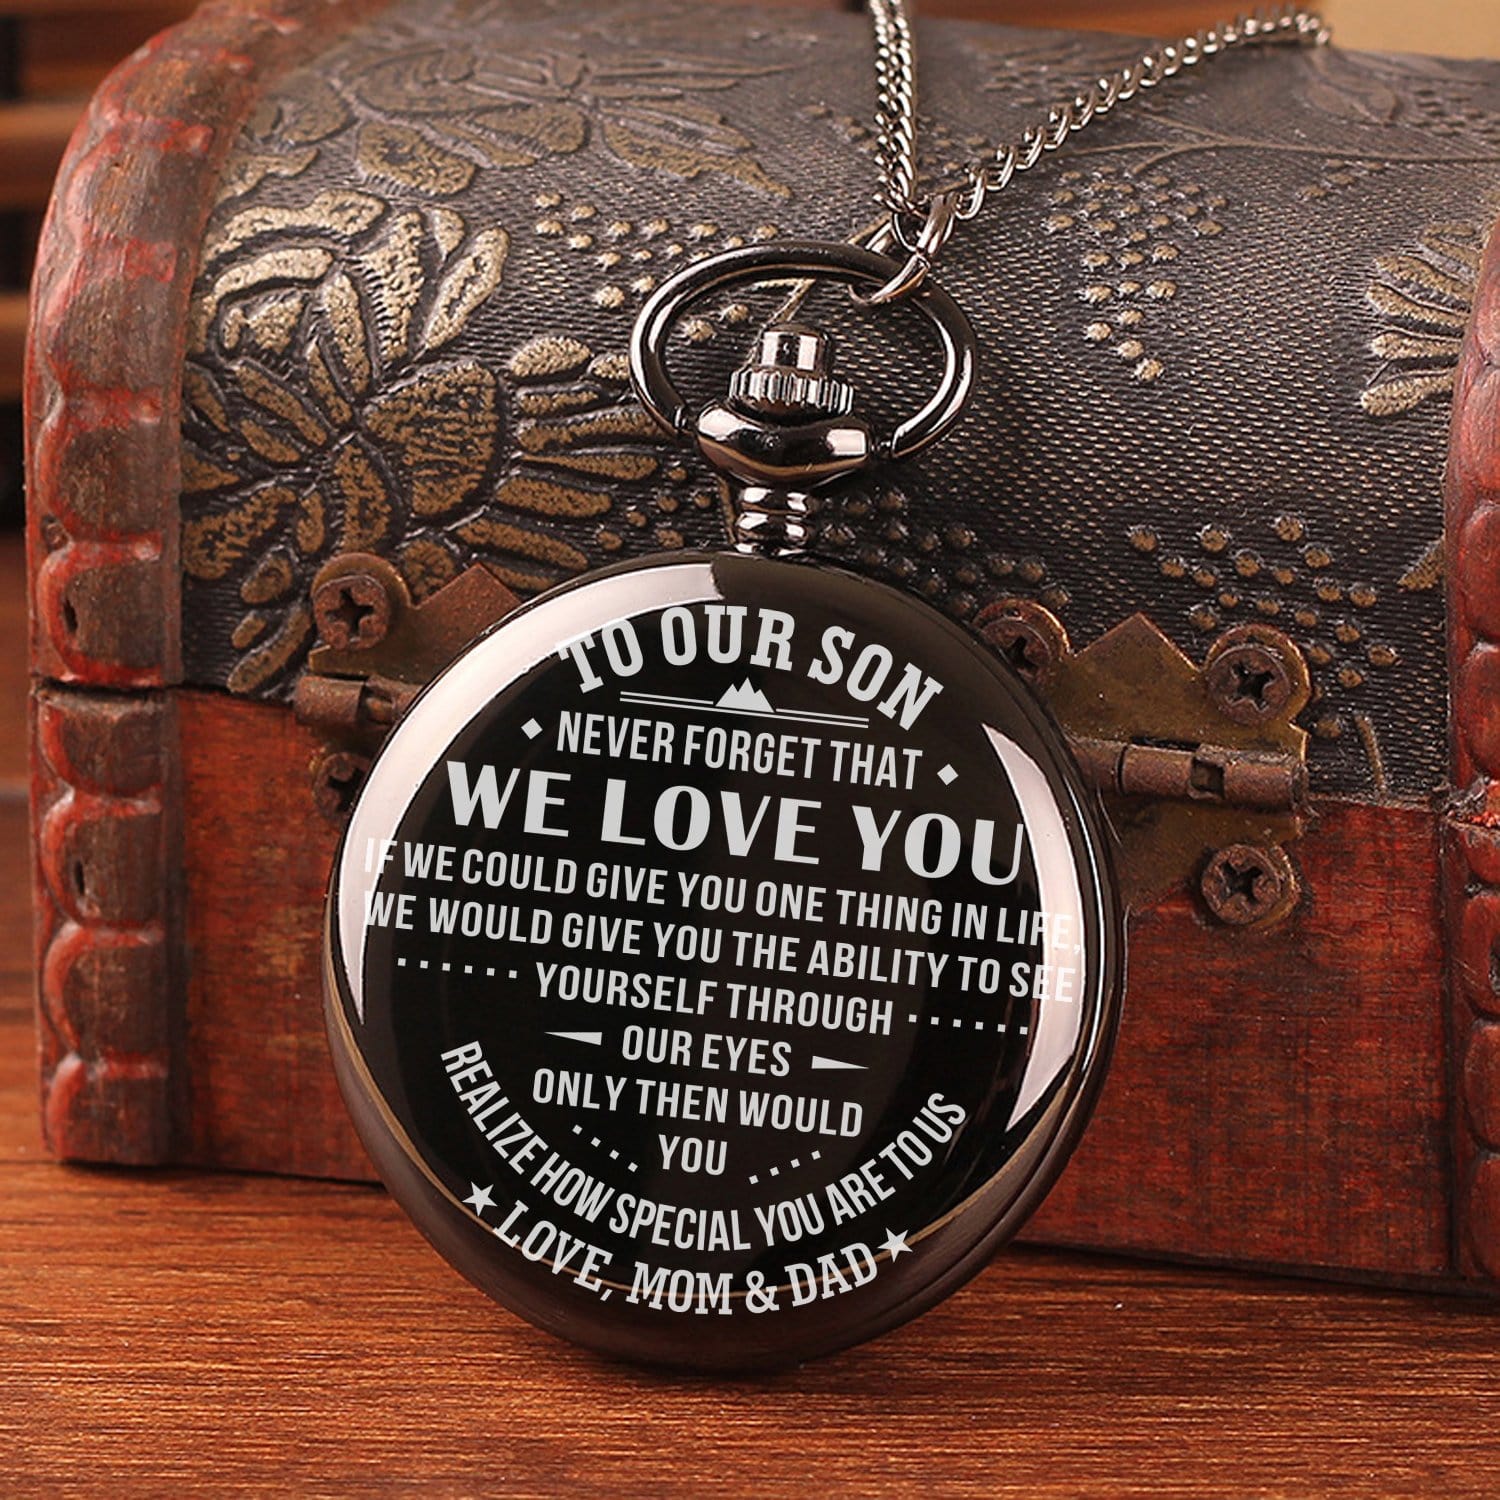 Pocket Watches To Our Son - You Realize How Special You Are To Us Pocket Watch GiveMe-Gifts